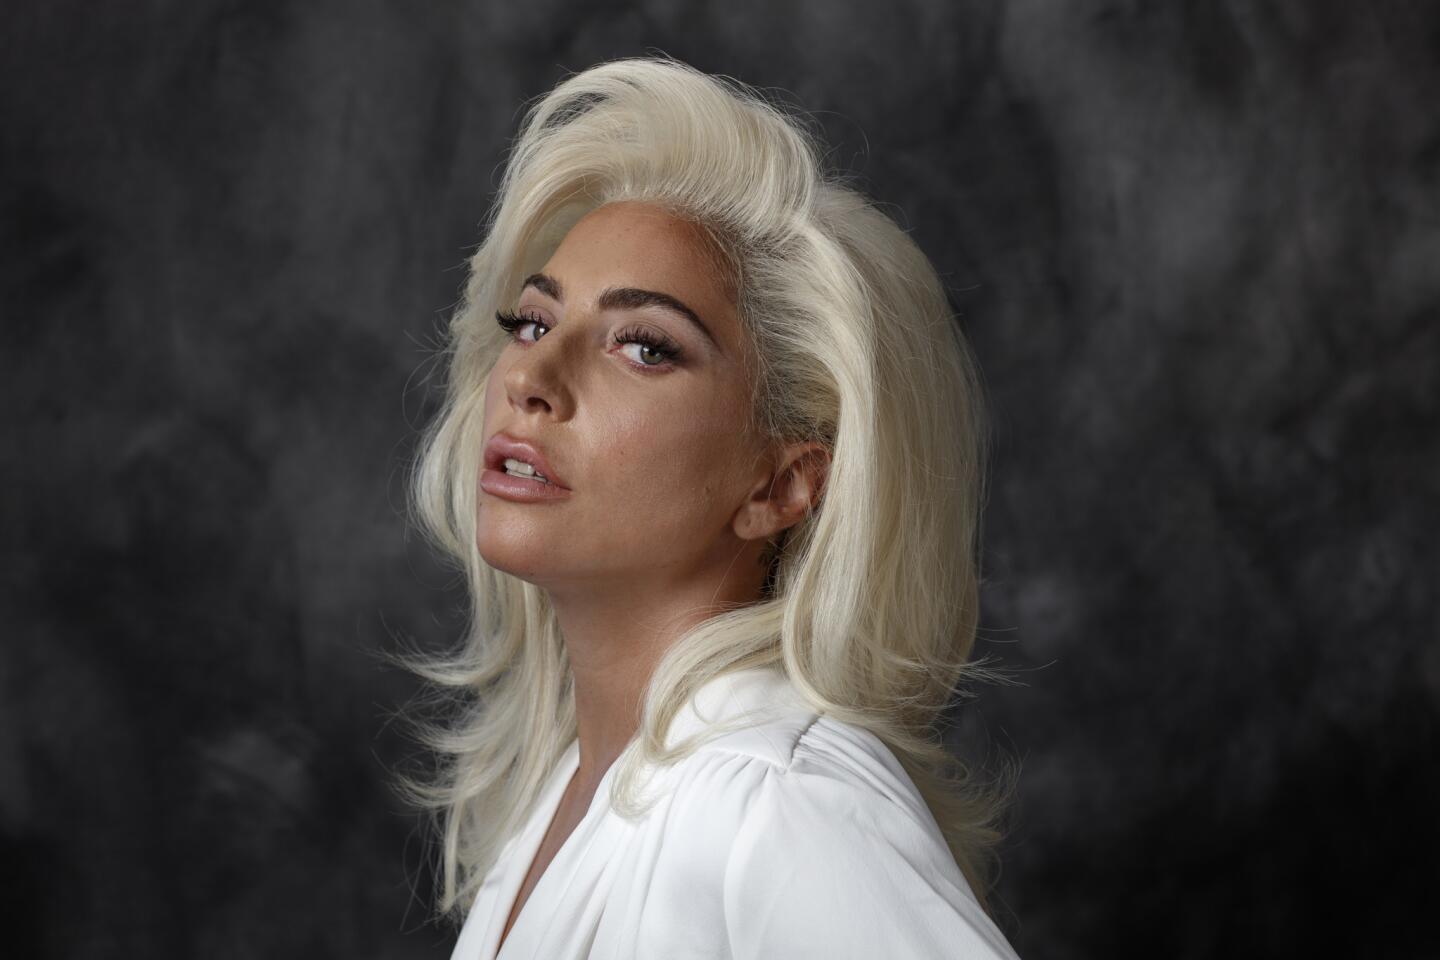 Previously nominated for an Oscar in the original song category in 2016 for “Til It Happens to You” from the documentary “The Hunting Ground,” superstar singer Lady Gaga earns her first acting nomination thanks to the blockbuster drama "A Star Is Born."